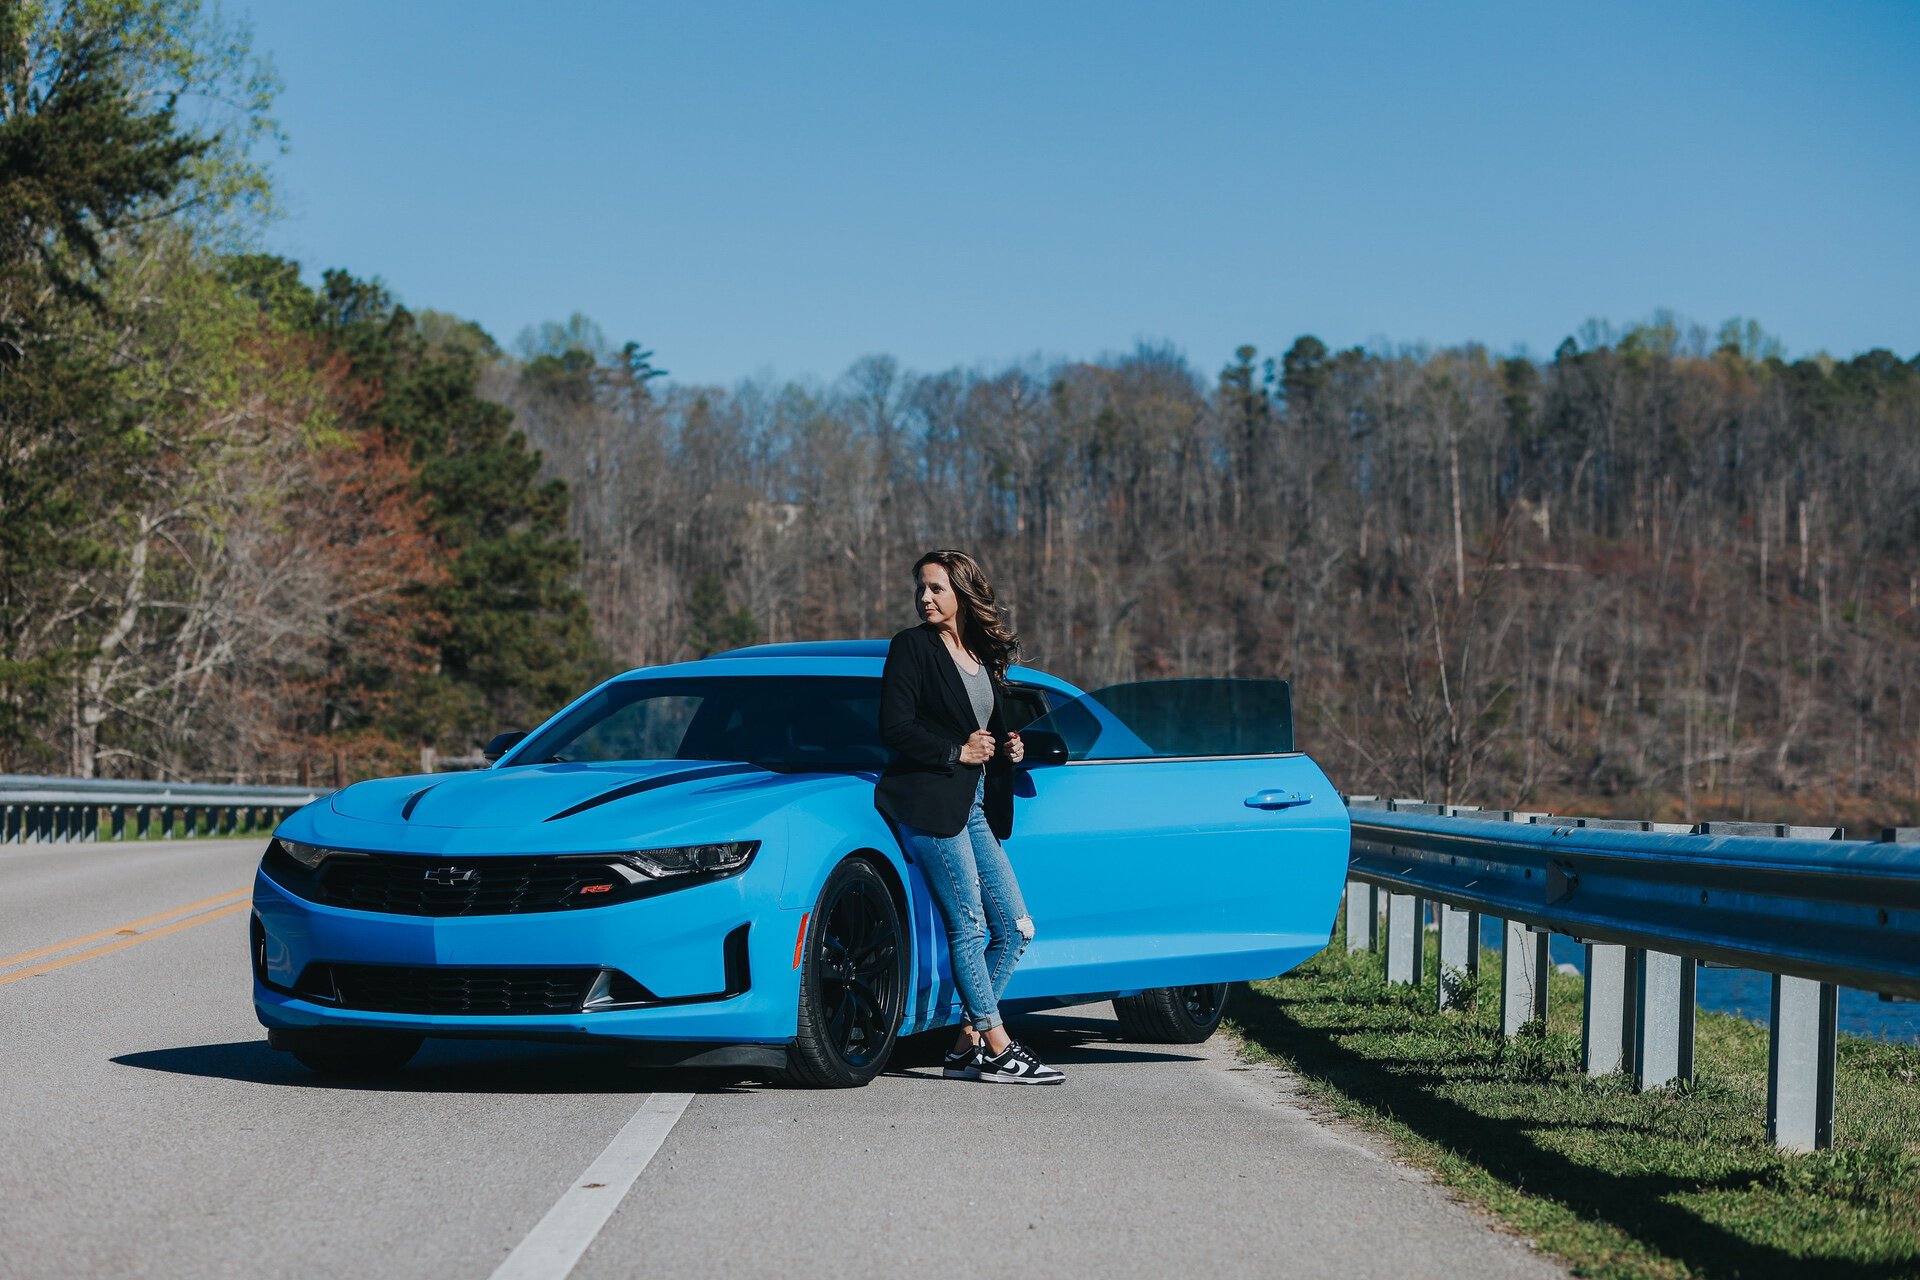 A person stands beside a blue sports car parked on the side of a road with trees in the background.